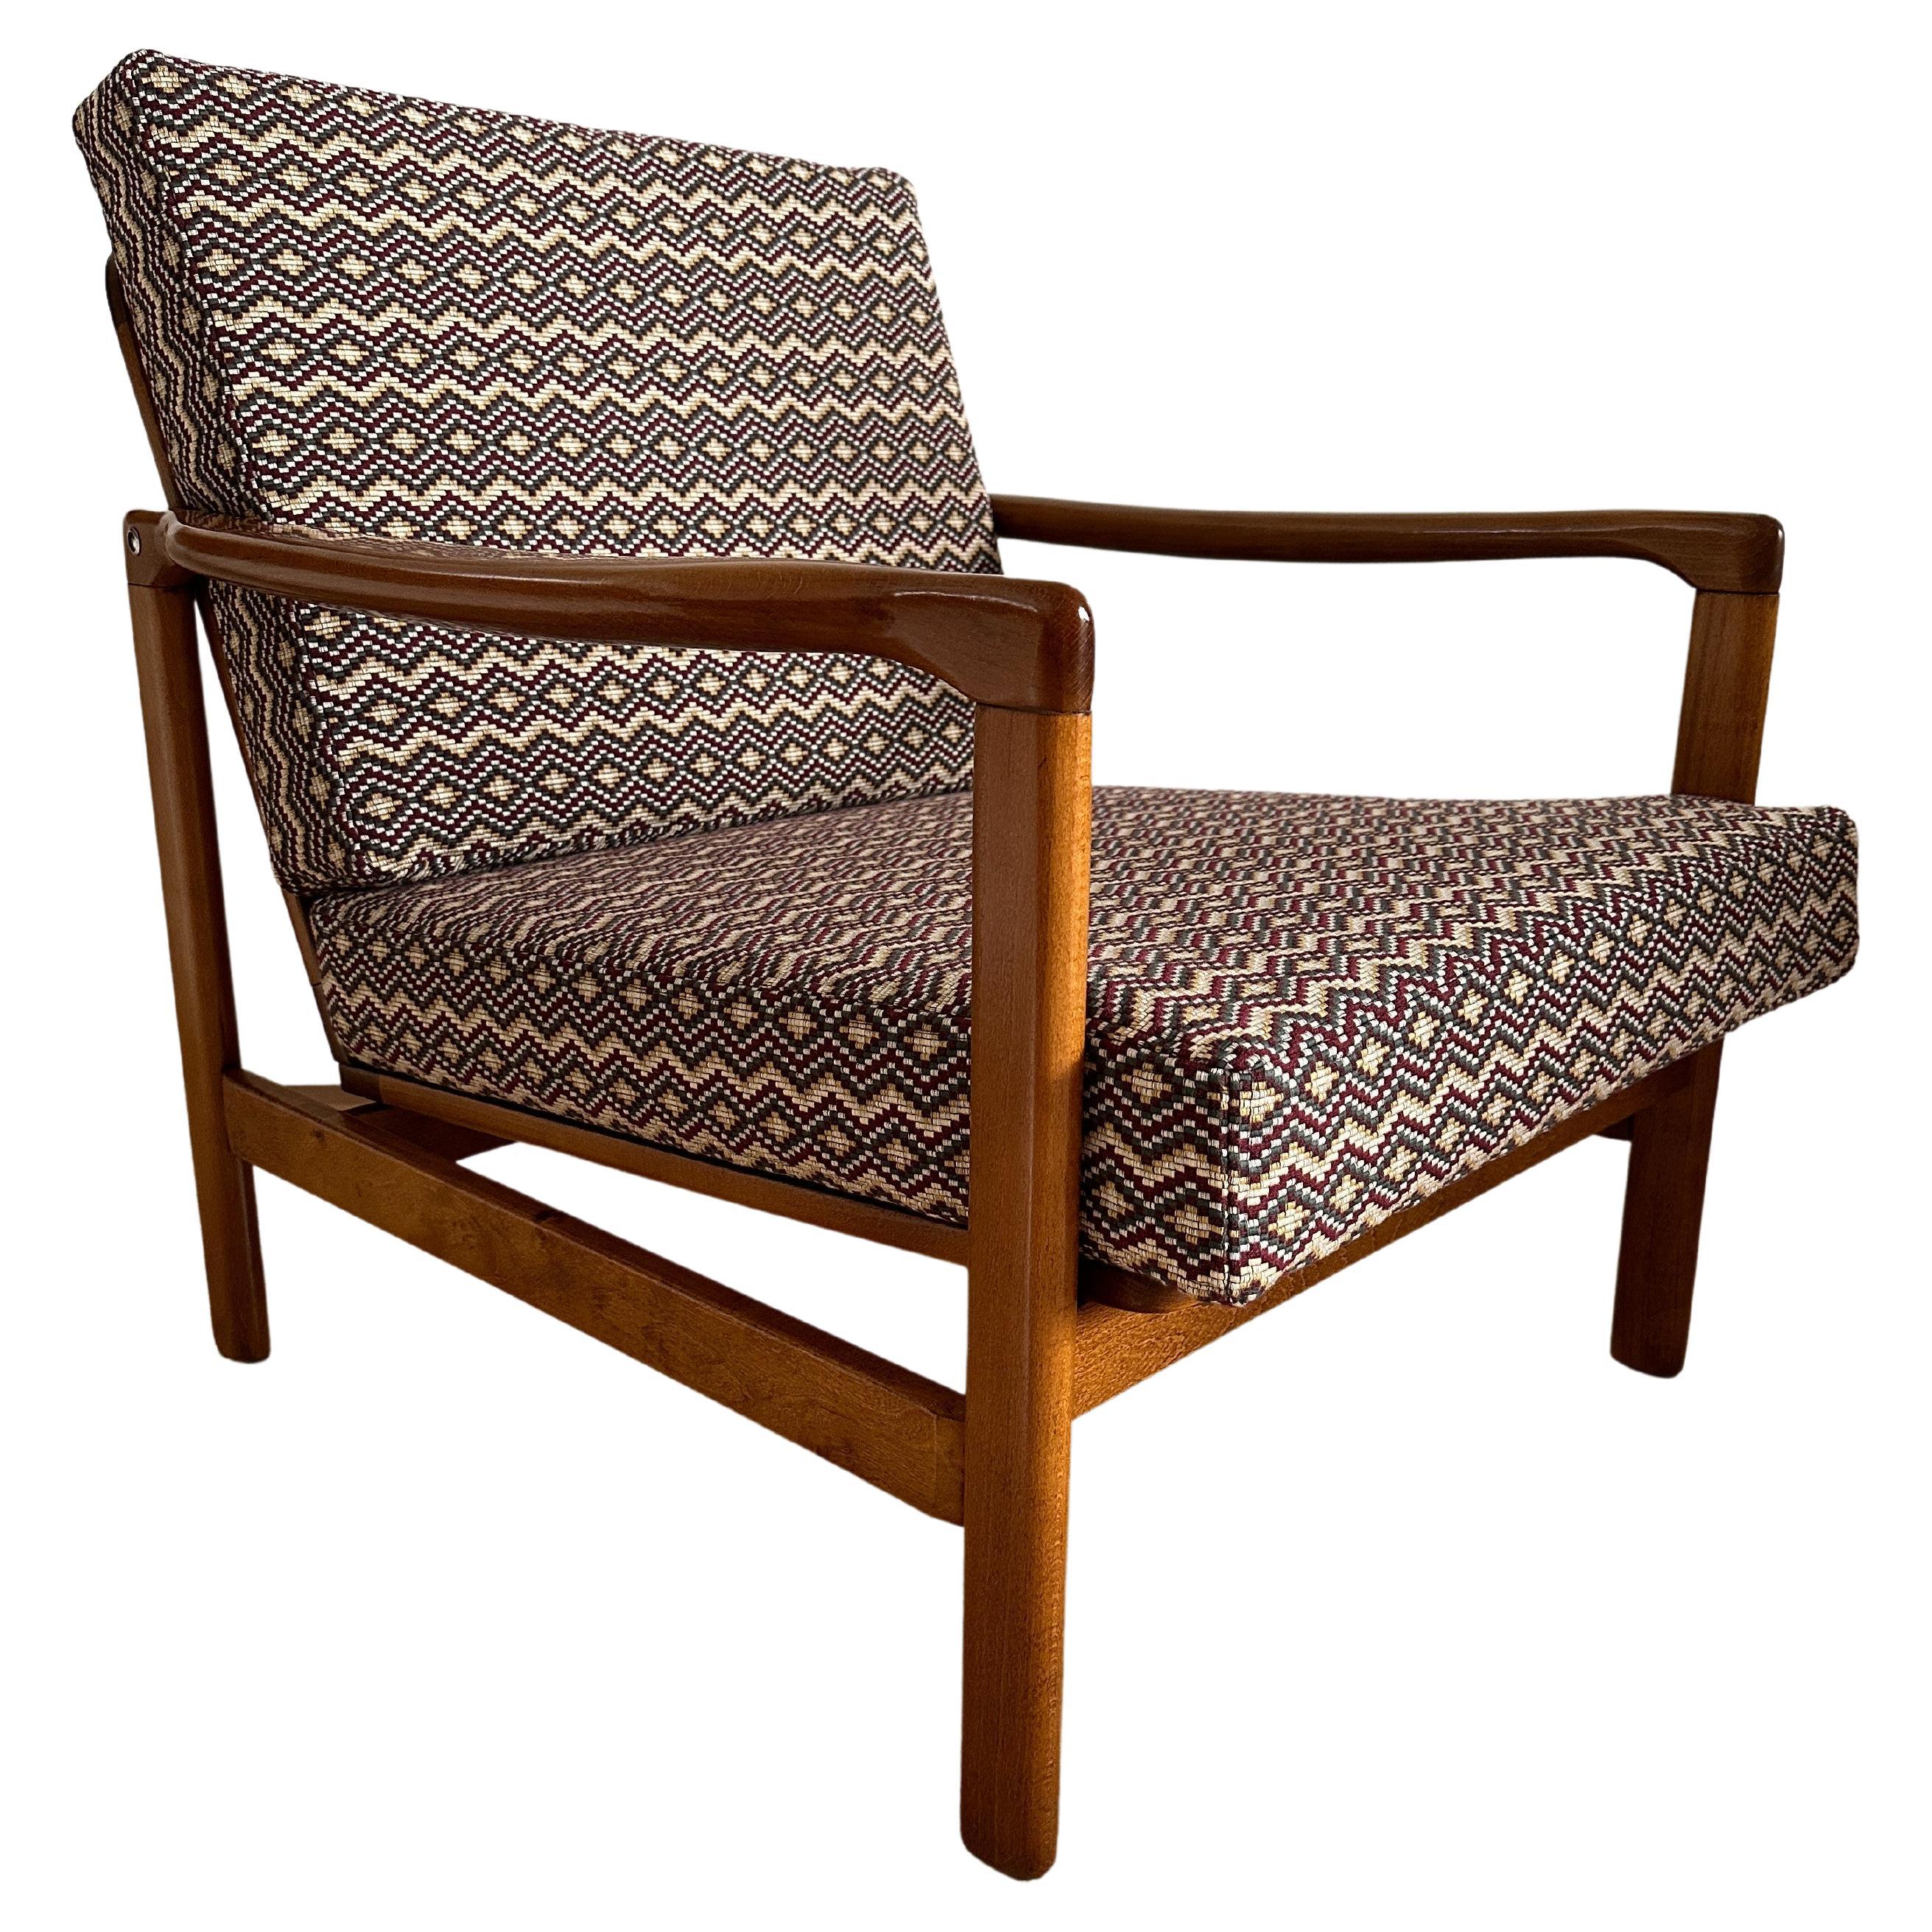 Midcentury Armchair, in Geometric and Ethnic Fabric, Europe, 1960s For Sale